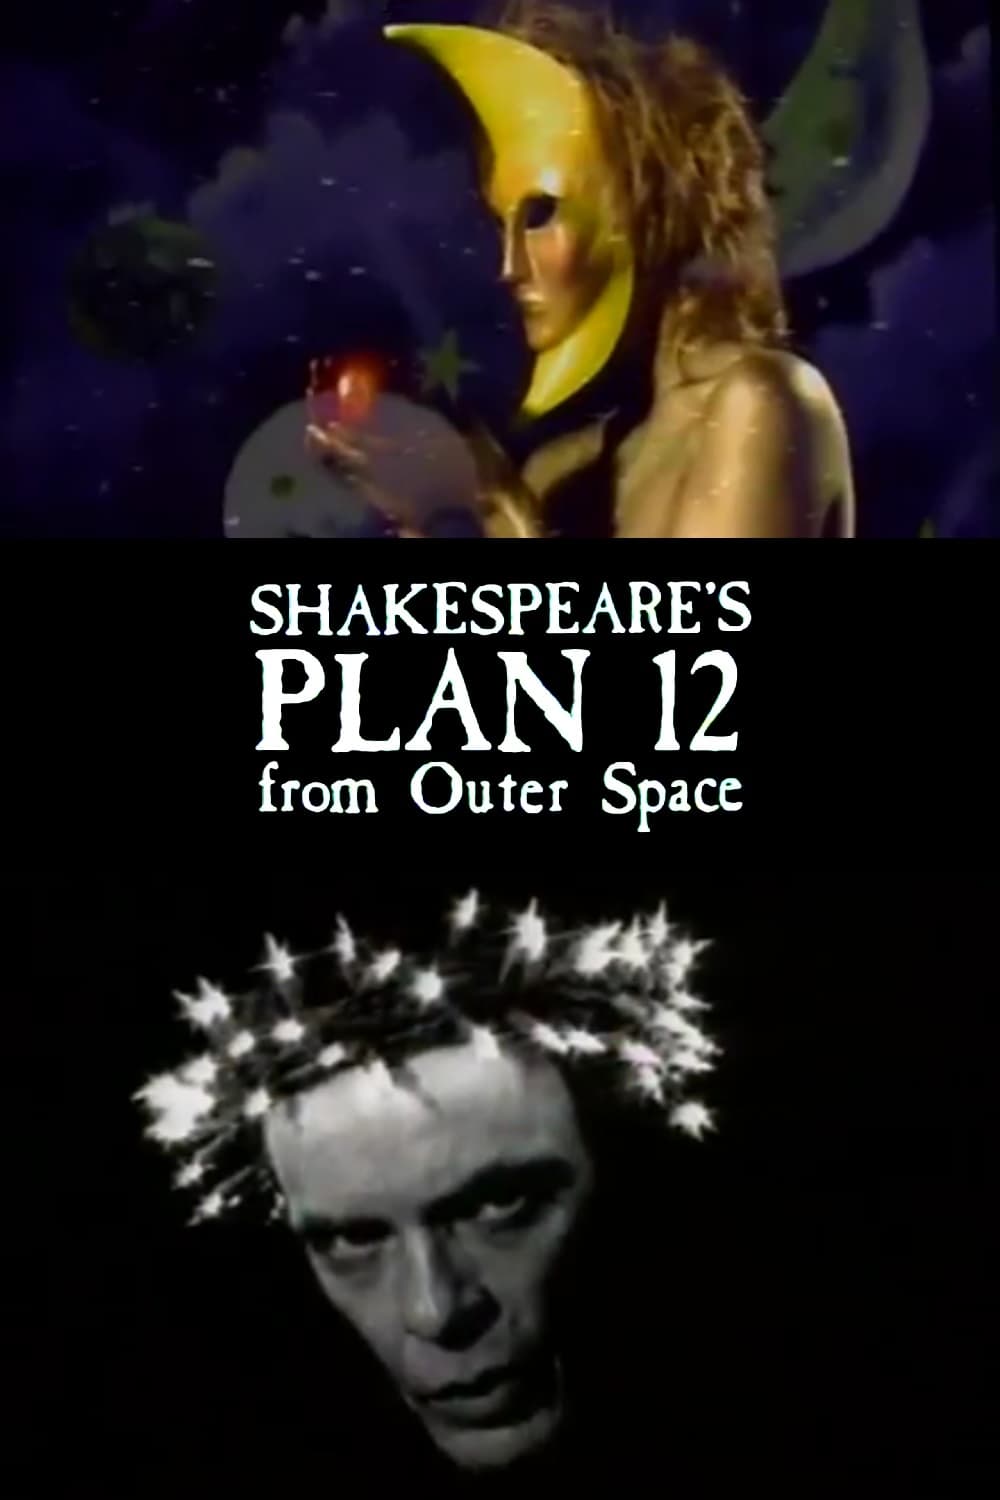 Shakespeare's Plan 12 from Outer Space (1996)